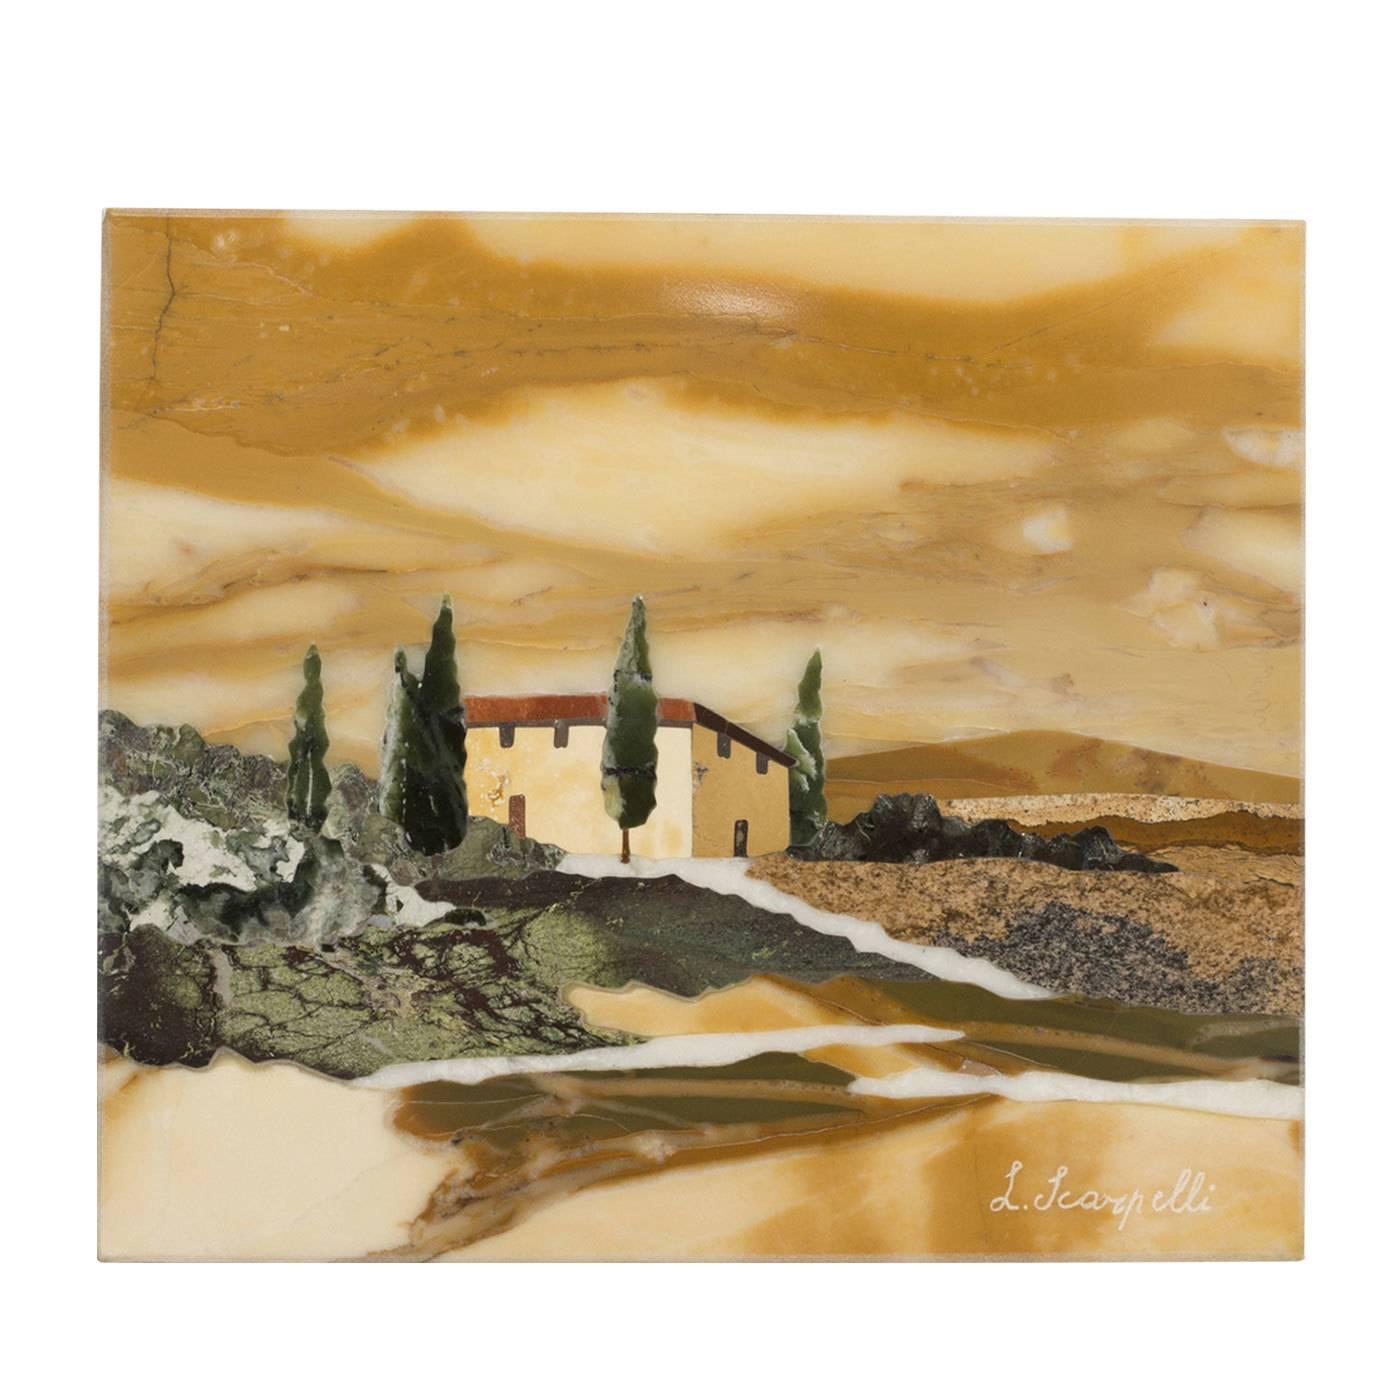 Florentine marble artists at Scarpelli were inspired by the nuanced grains of yellow Siena marble for this graceful Florentine mosaic depicting a Tuscan landscape. Scarpelli employed Renaissance techniques, different semi-precious stones, such as